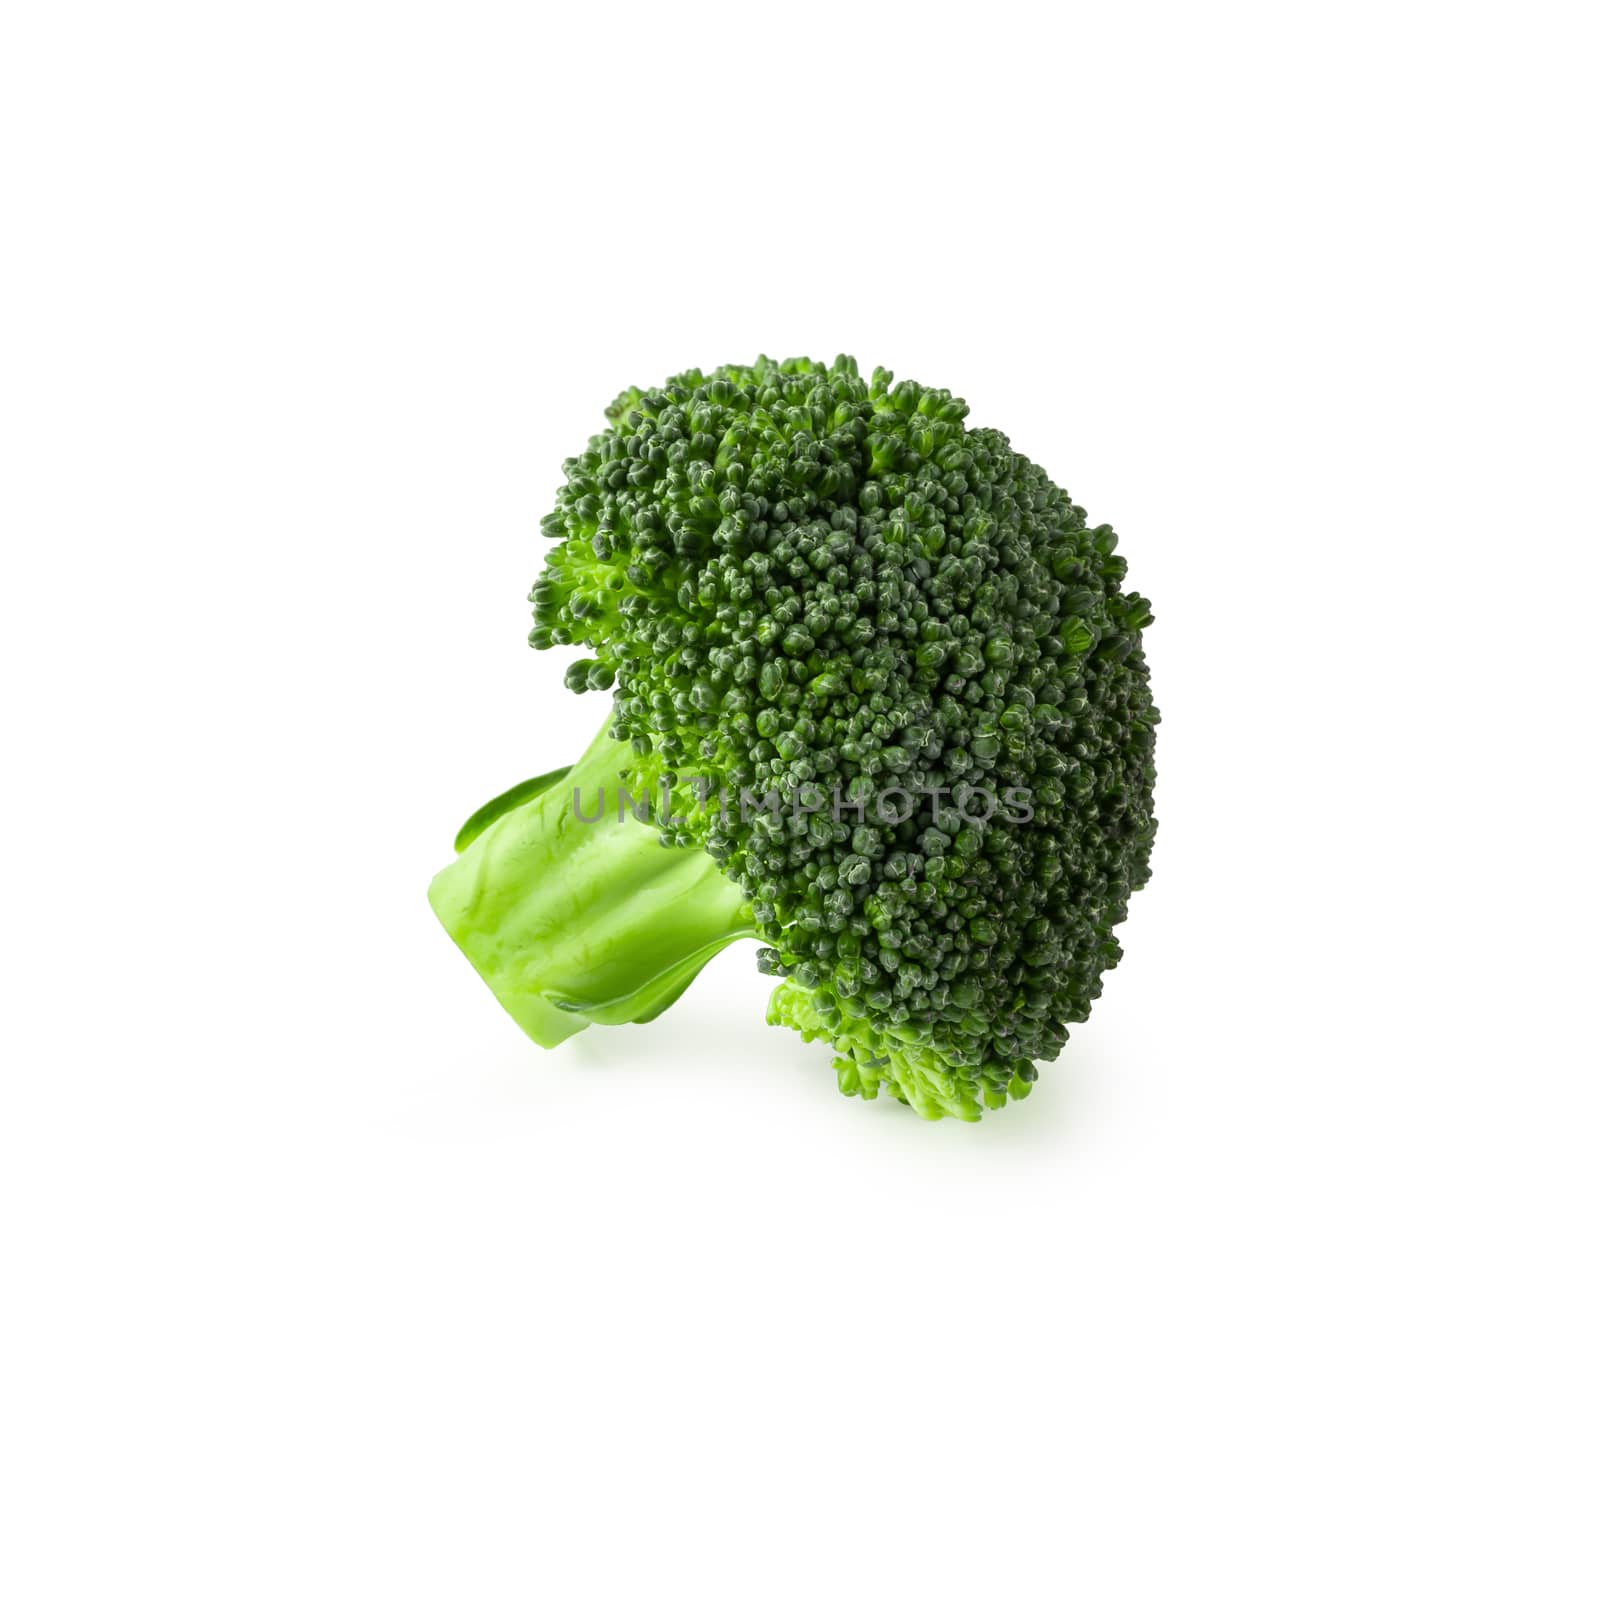 Fresh broccoli blocks for cooking isolated over white background by kaiskynet